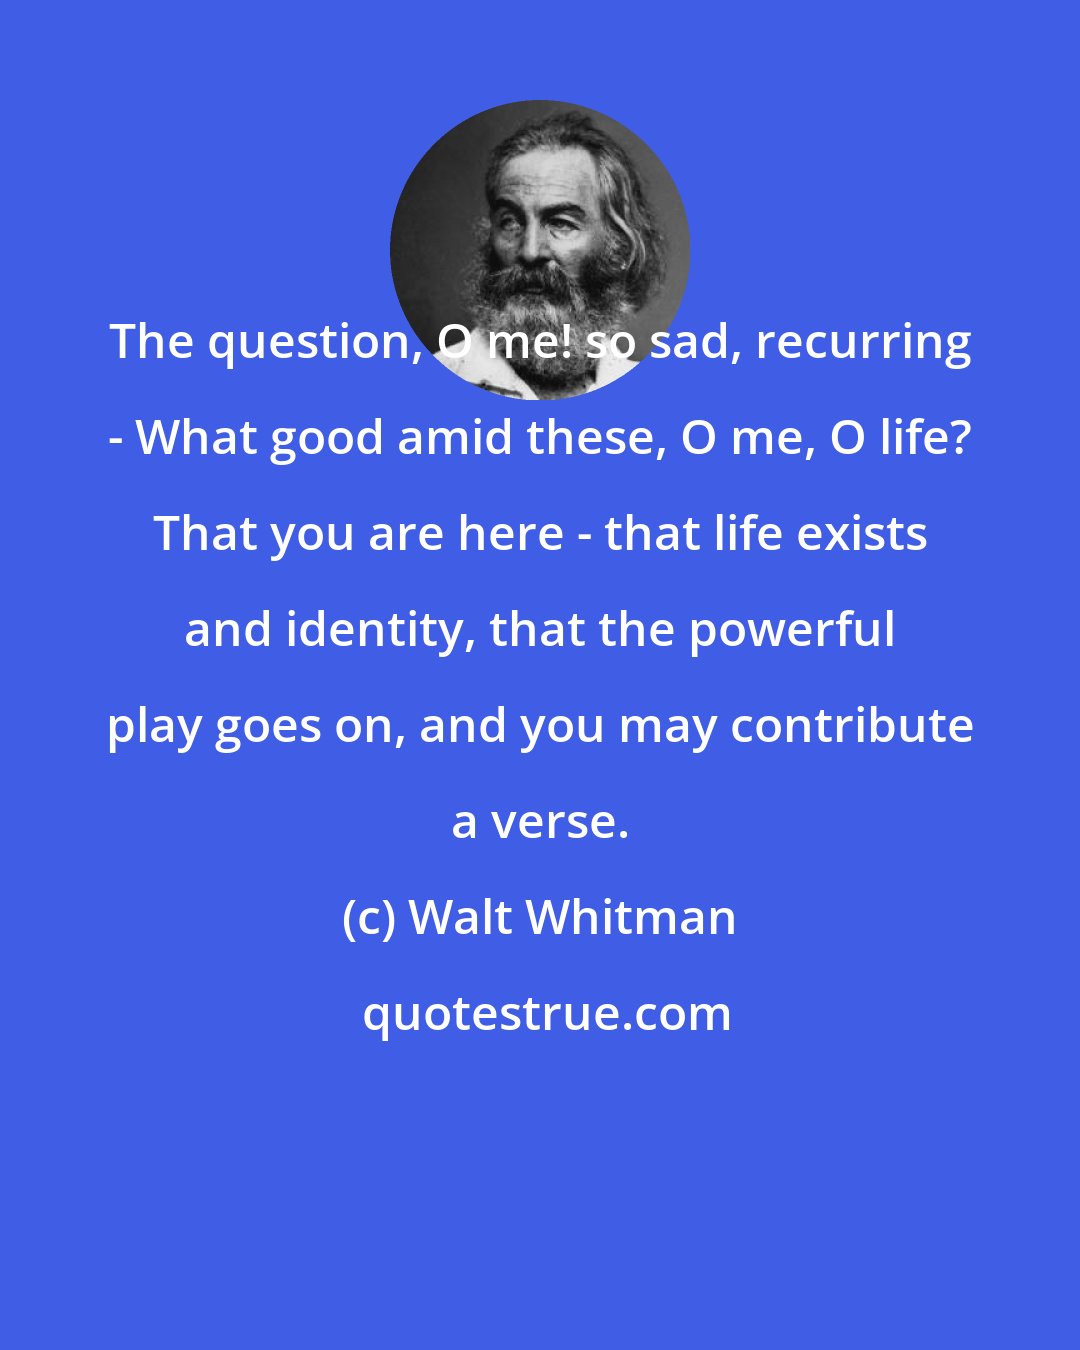 Walt Whitman: The question, O me! so sad, recurring - What good amid these, O me, O life? That you are here - that life exists and identity, that the powerful play goes on, and you may contribute a verse.